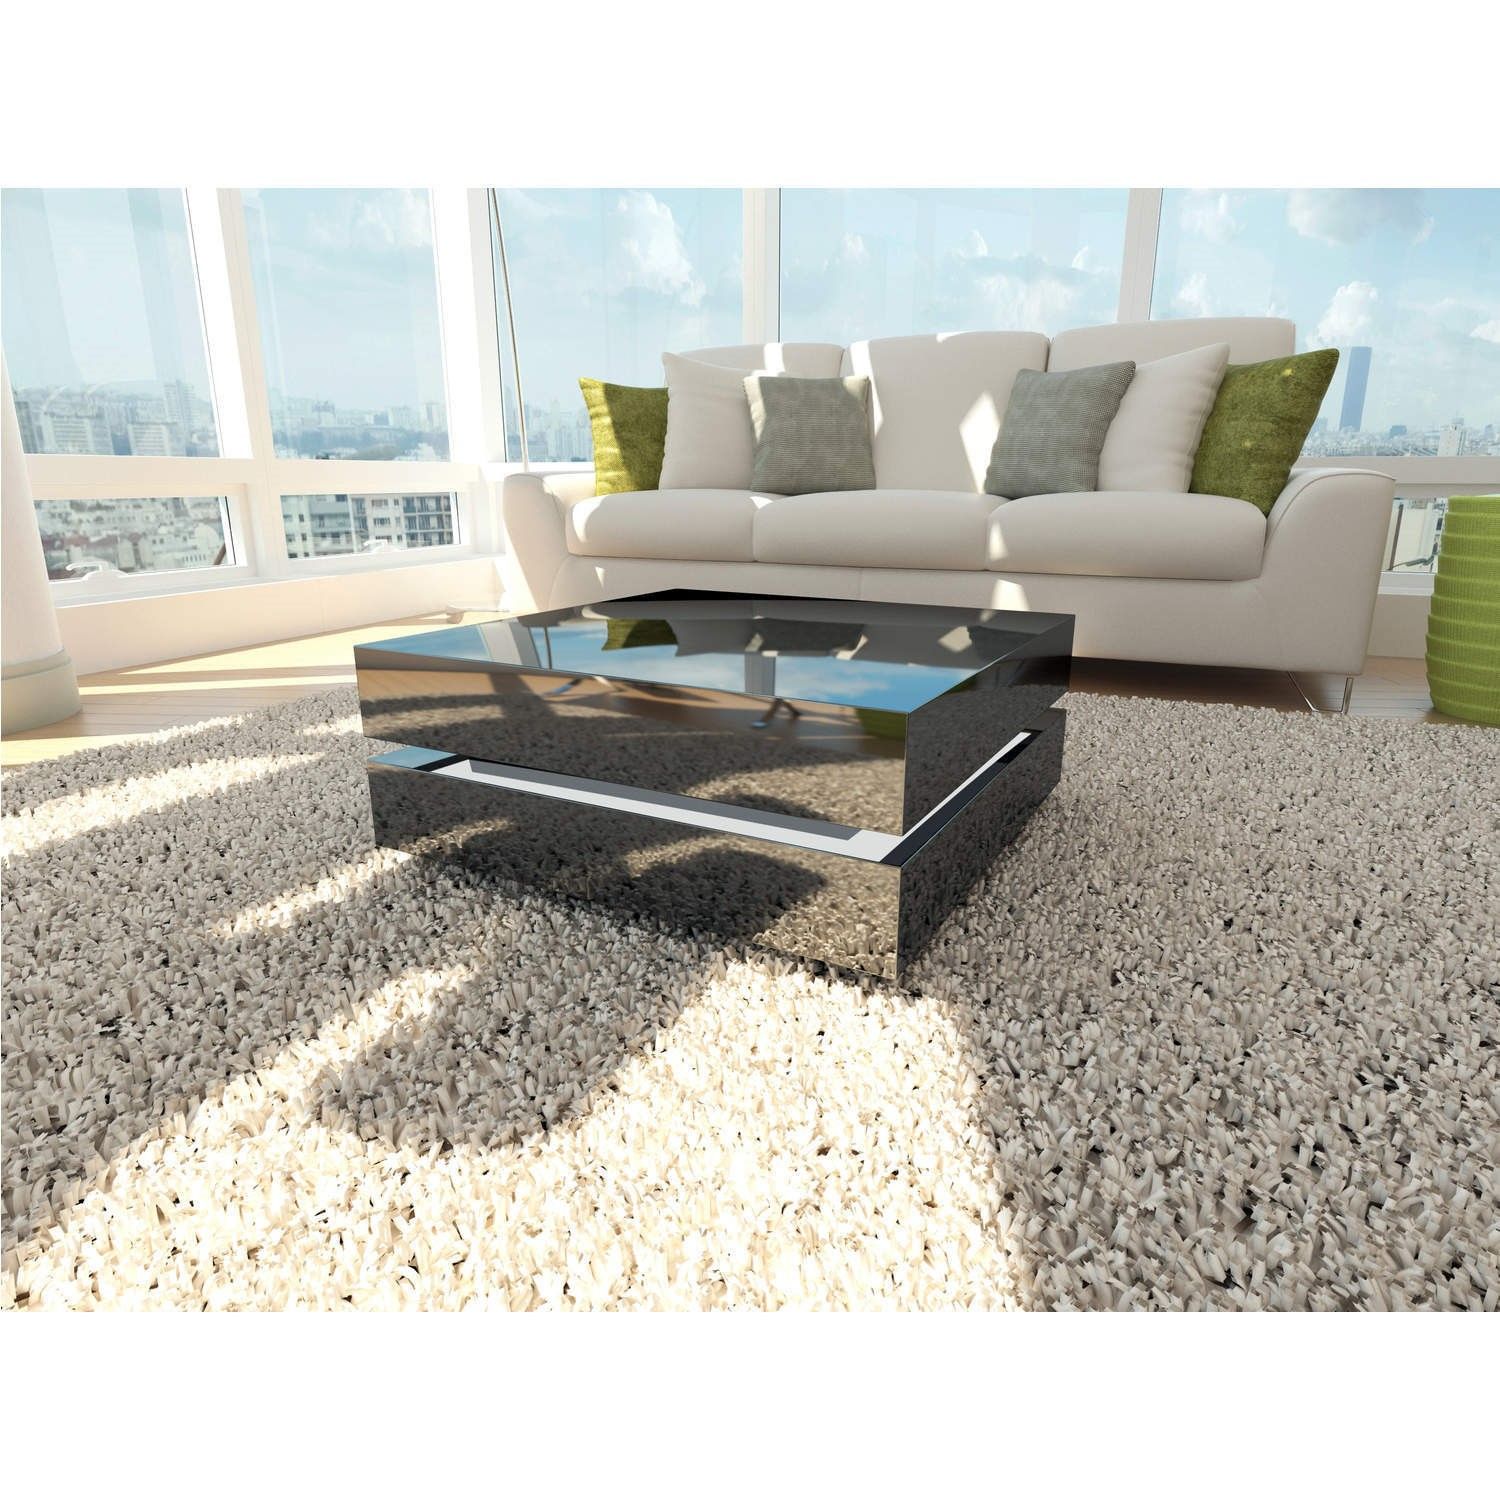 High Gloss Black Coffee Table With Led Lighting – Tiffany Range Throughout High Gloss Black Coffee Tables (View 7 of 15)